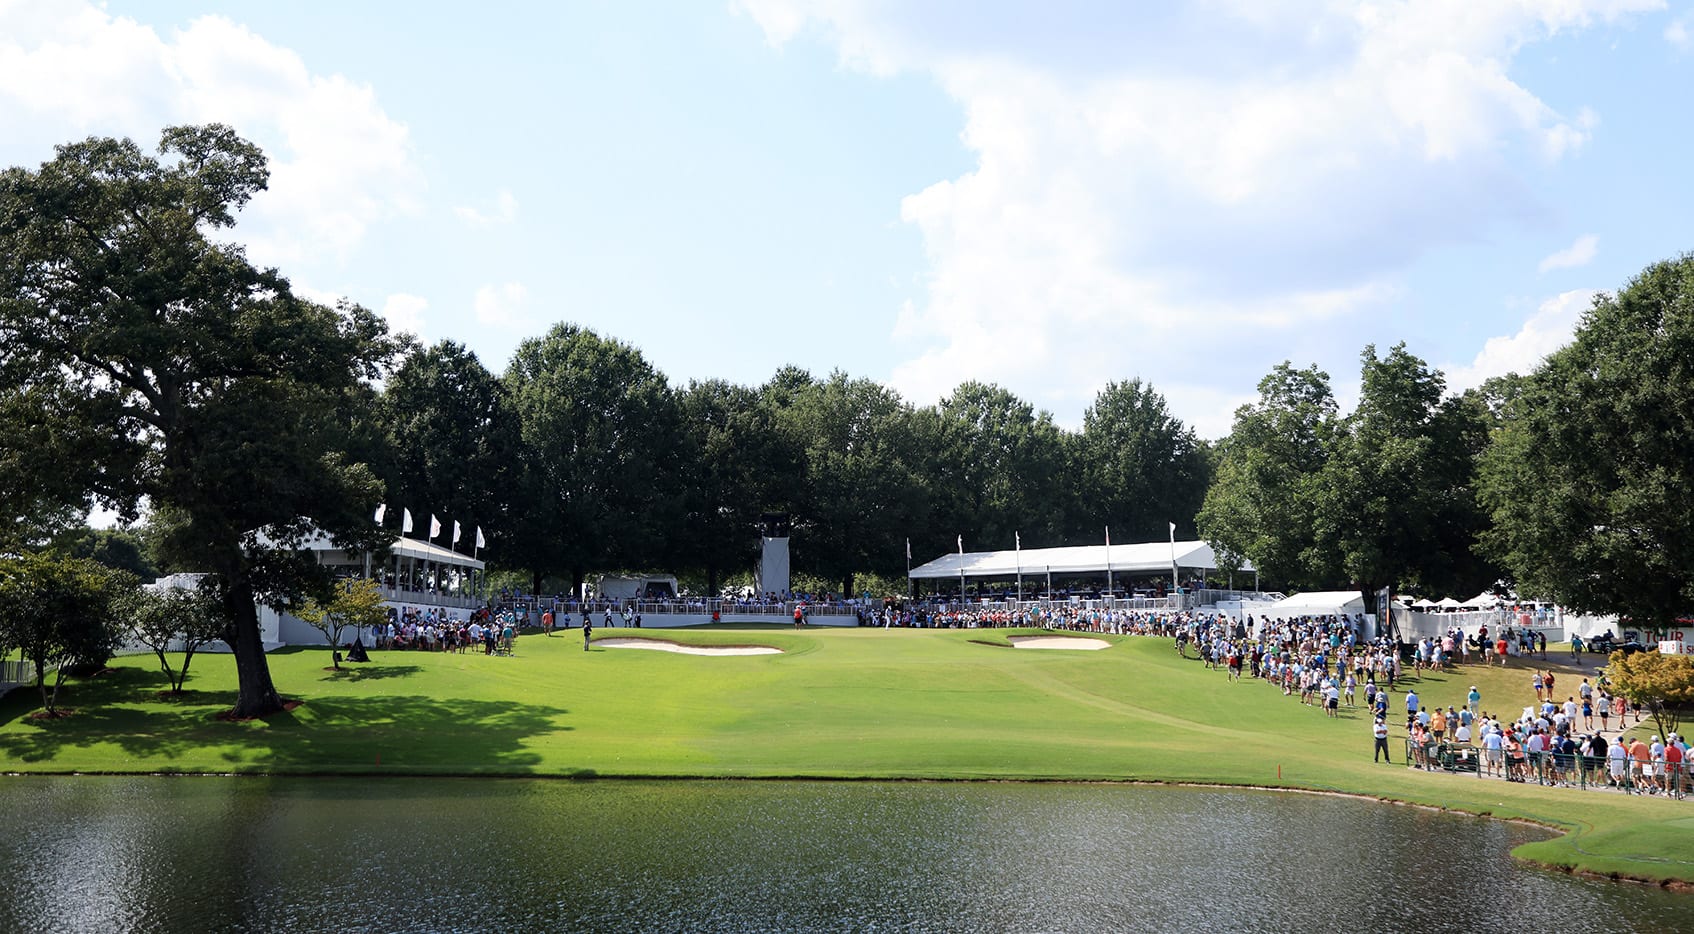 tour championship featured groups